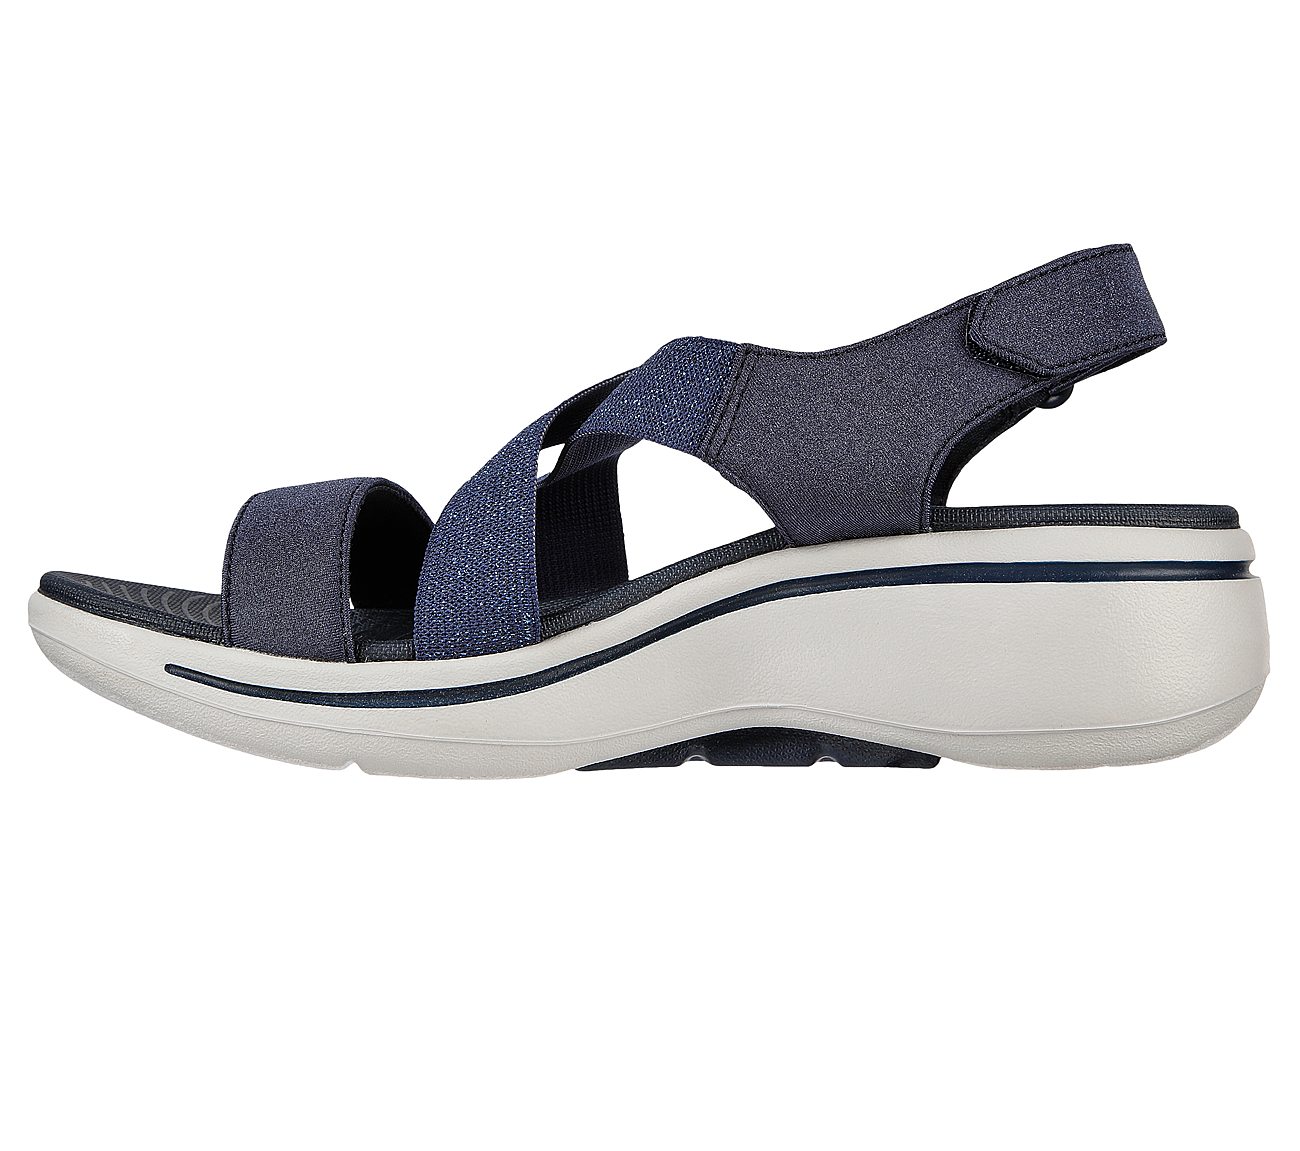 GO WALK ARCH FIT - ASTONISH, Navy image number null